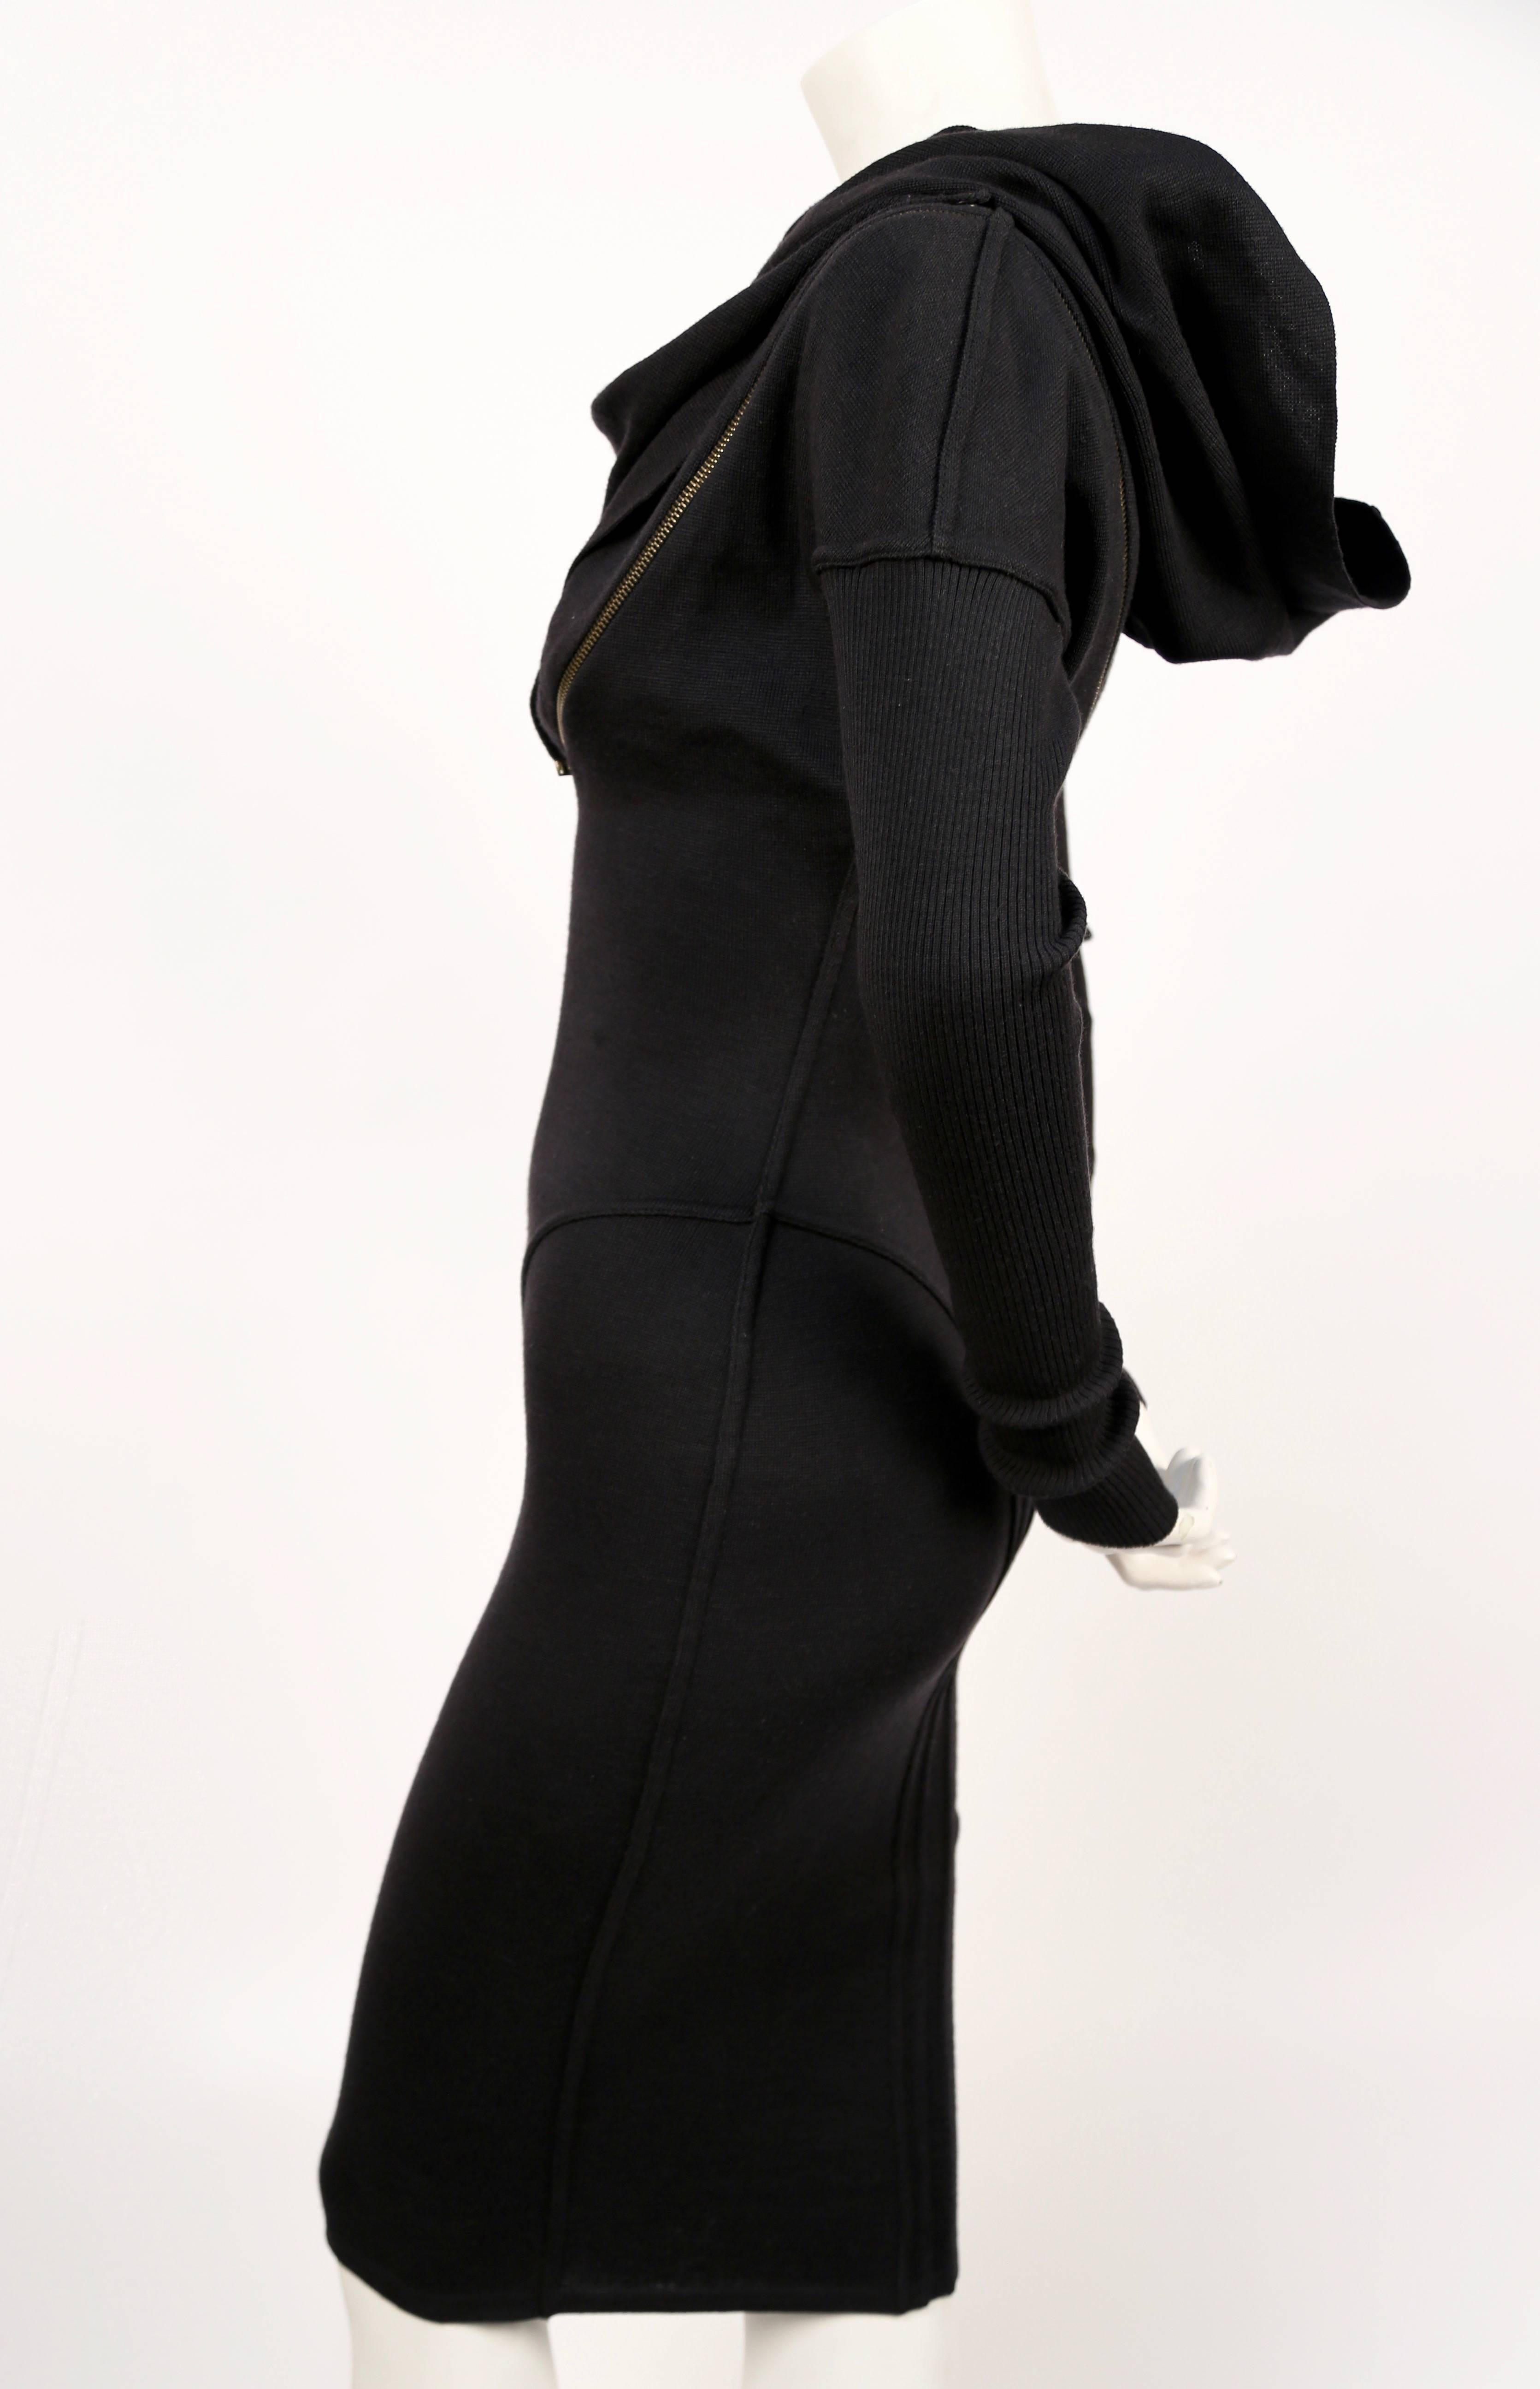 Iconic black wool seamed zipper dress with hood designed by Azzedine Alaia dating to fall of 1986. Well documented piece. Very flattering seams with spiral zipper that cleverly follows the contours of dress seams. 'Hood' can be draped for a more